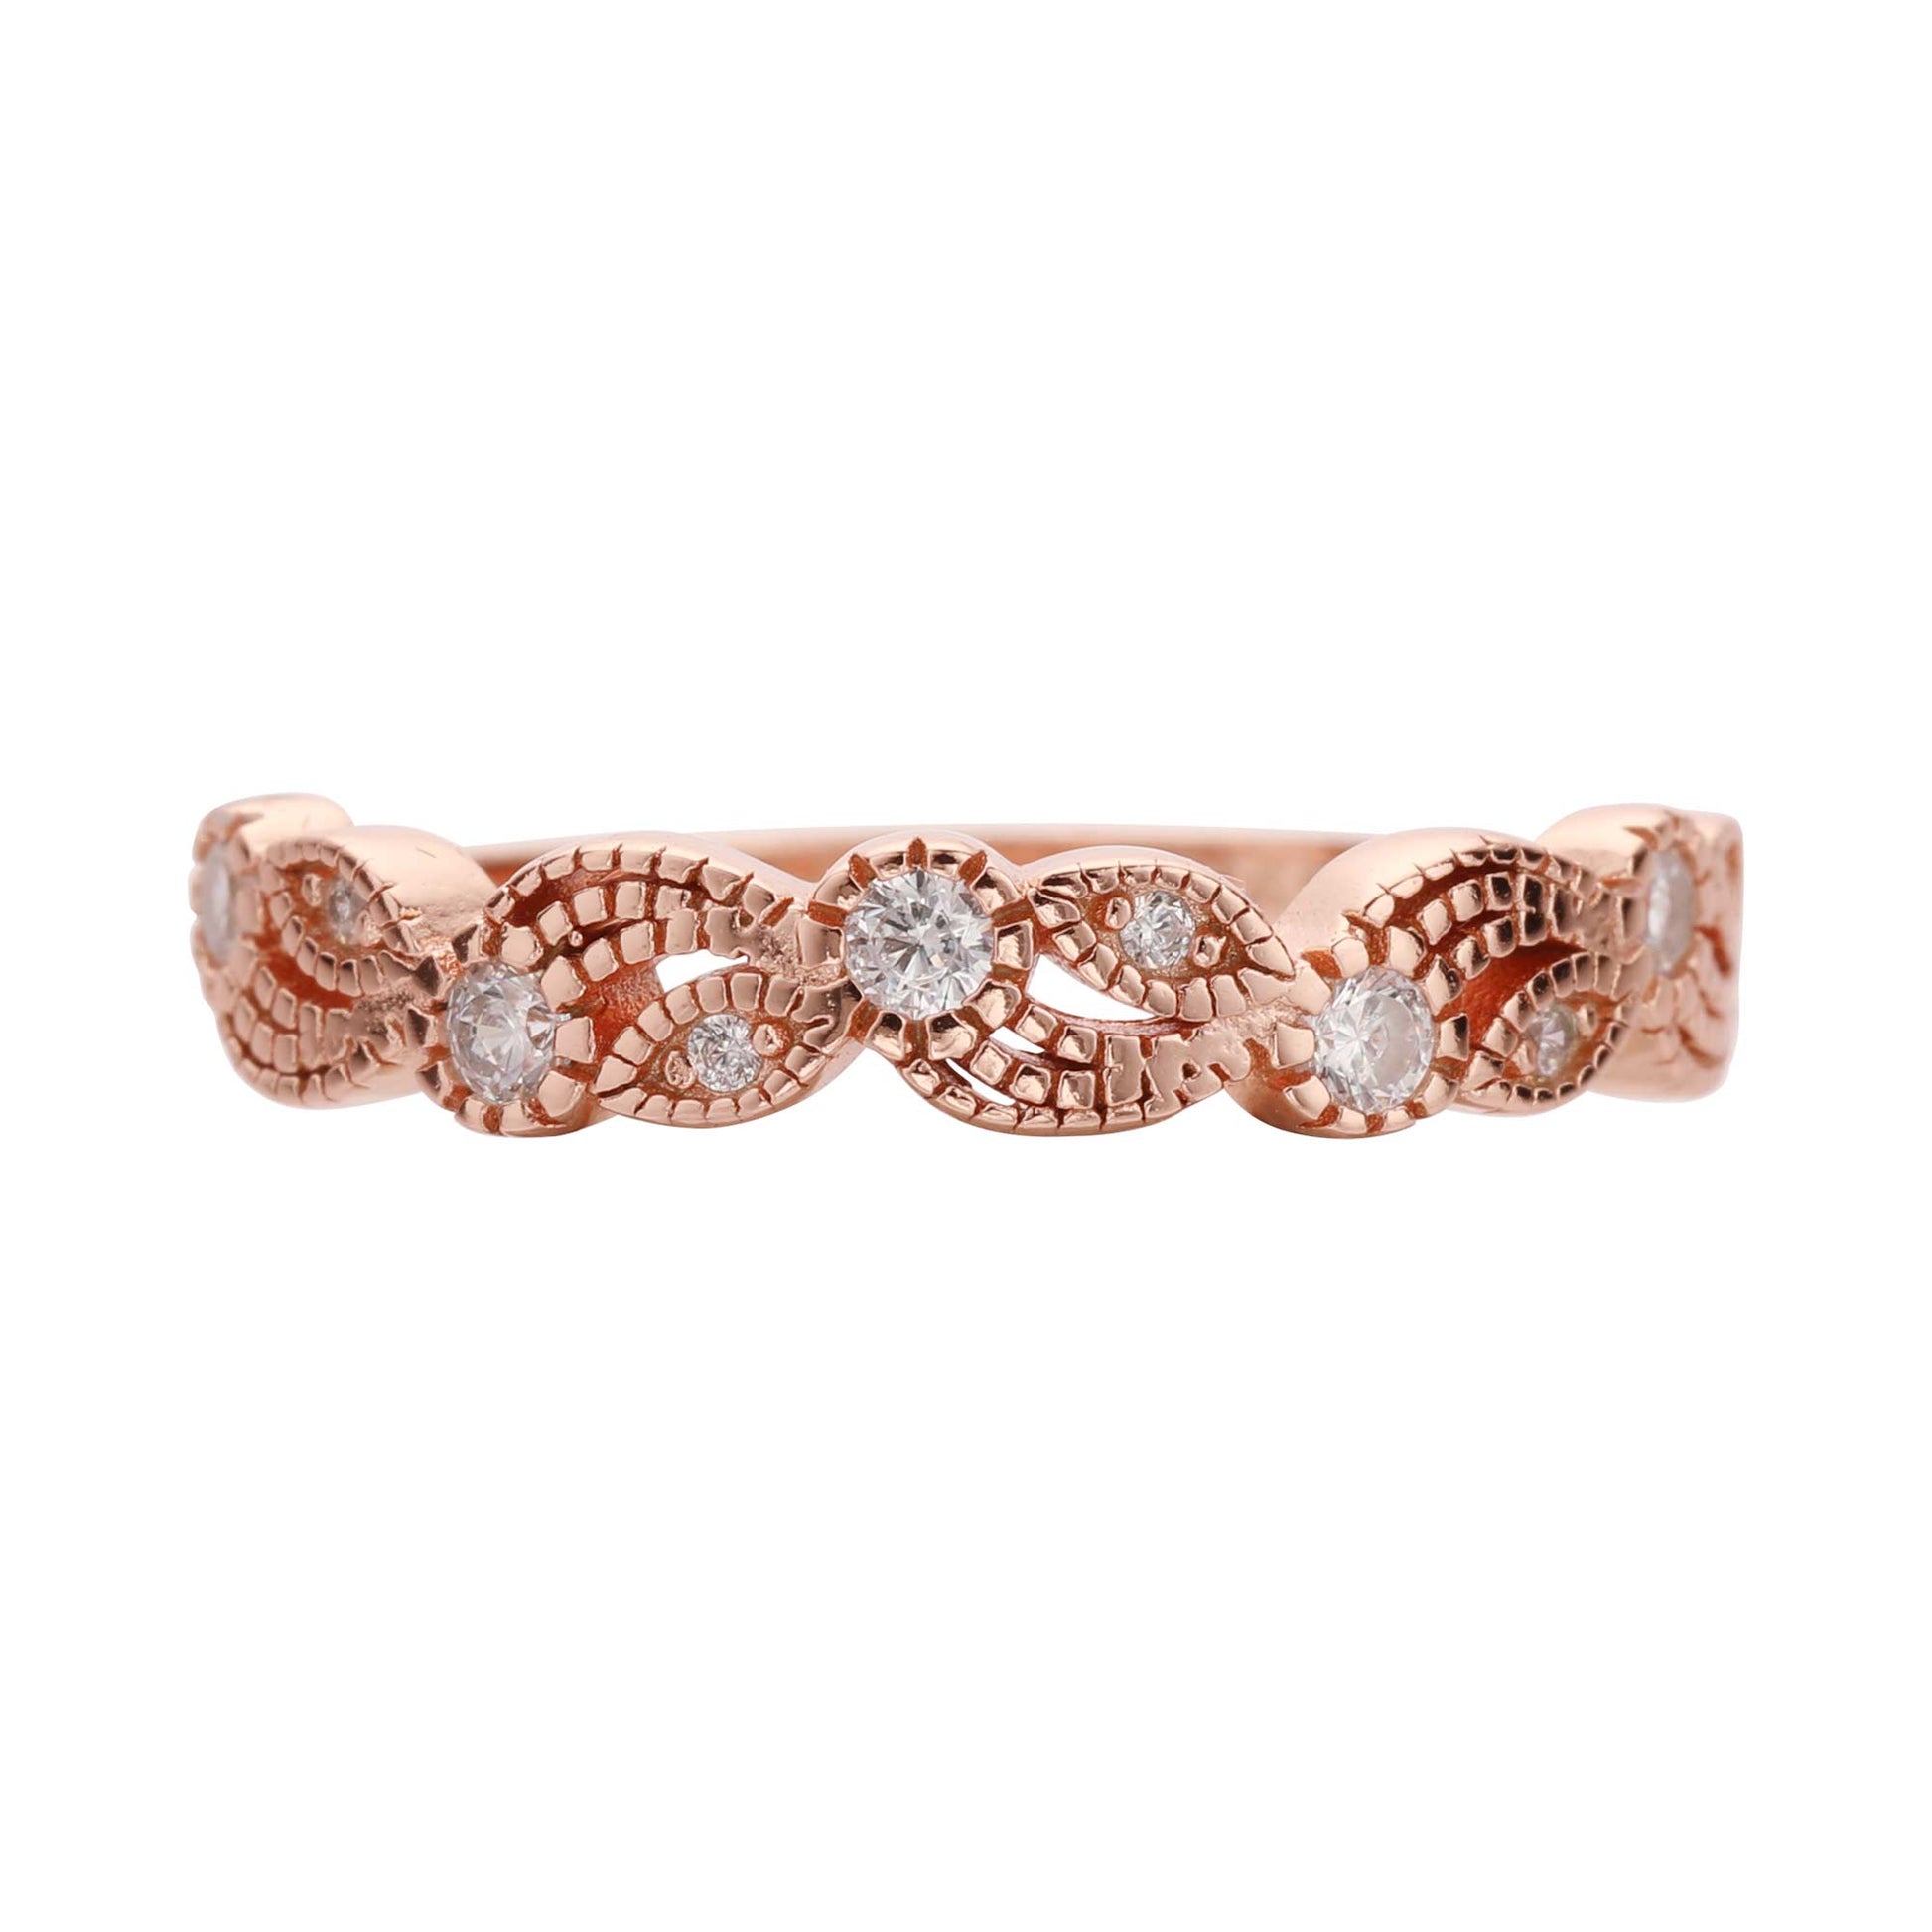 A rose gold swirl and leaf designed band set with clear small gems.